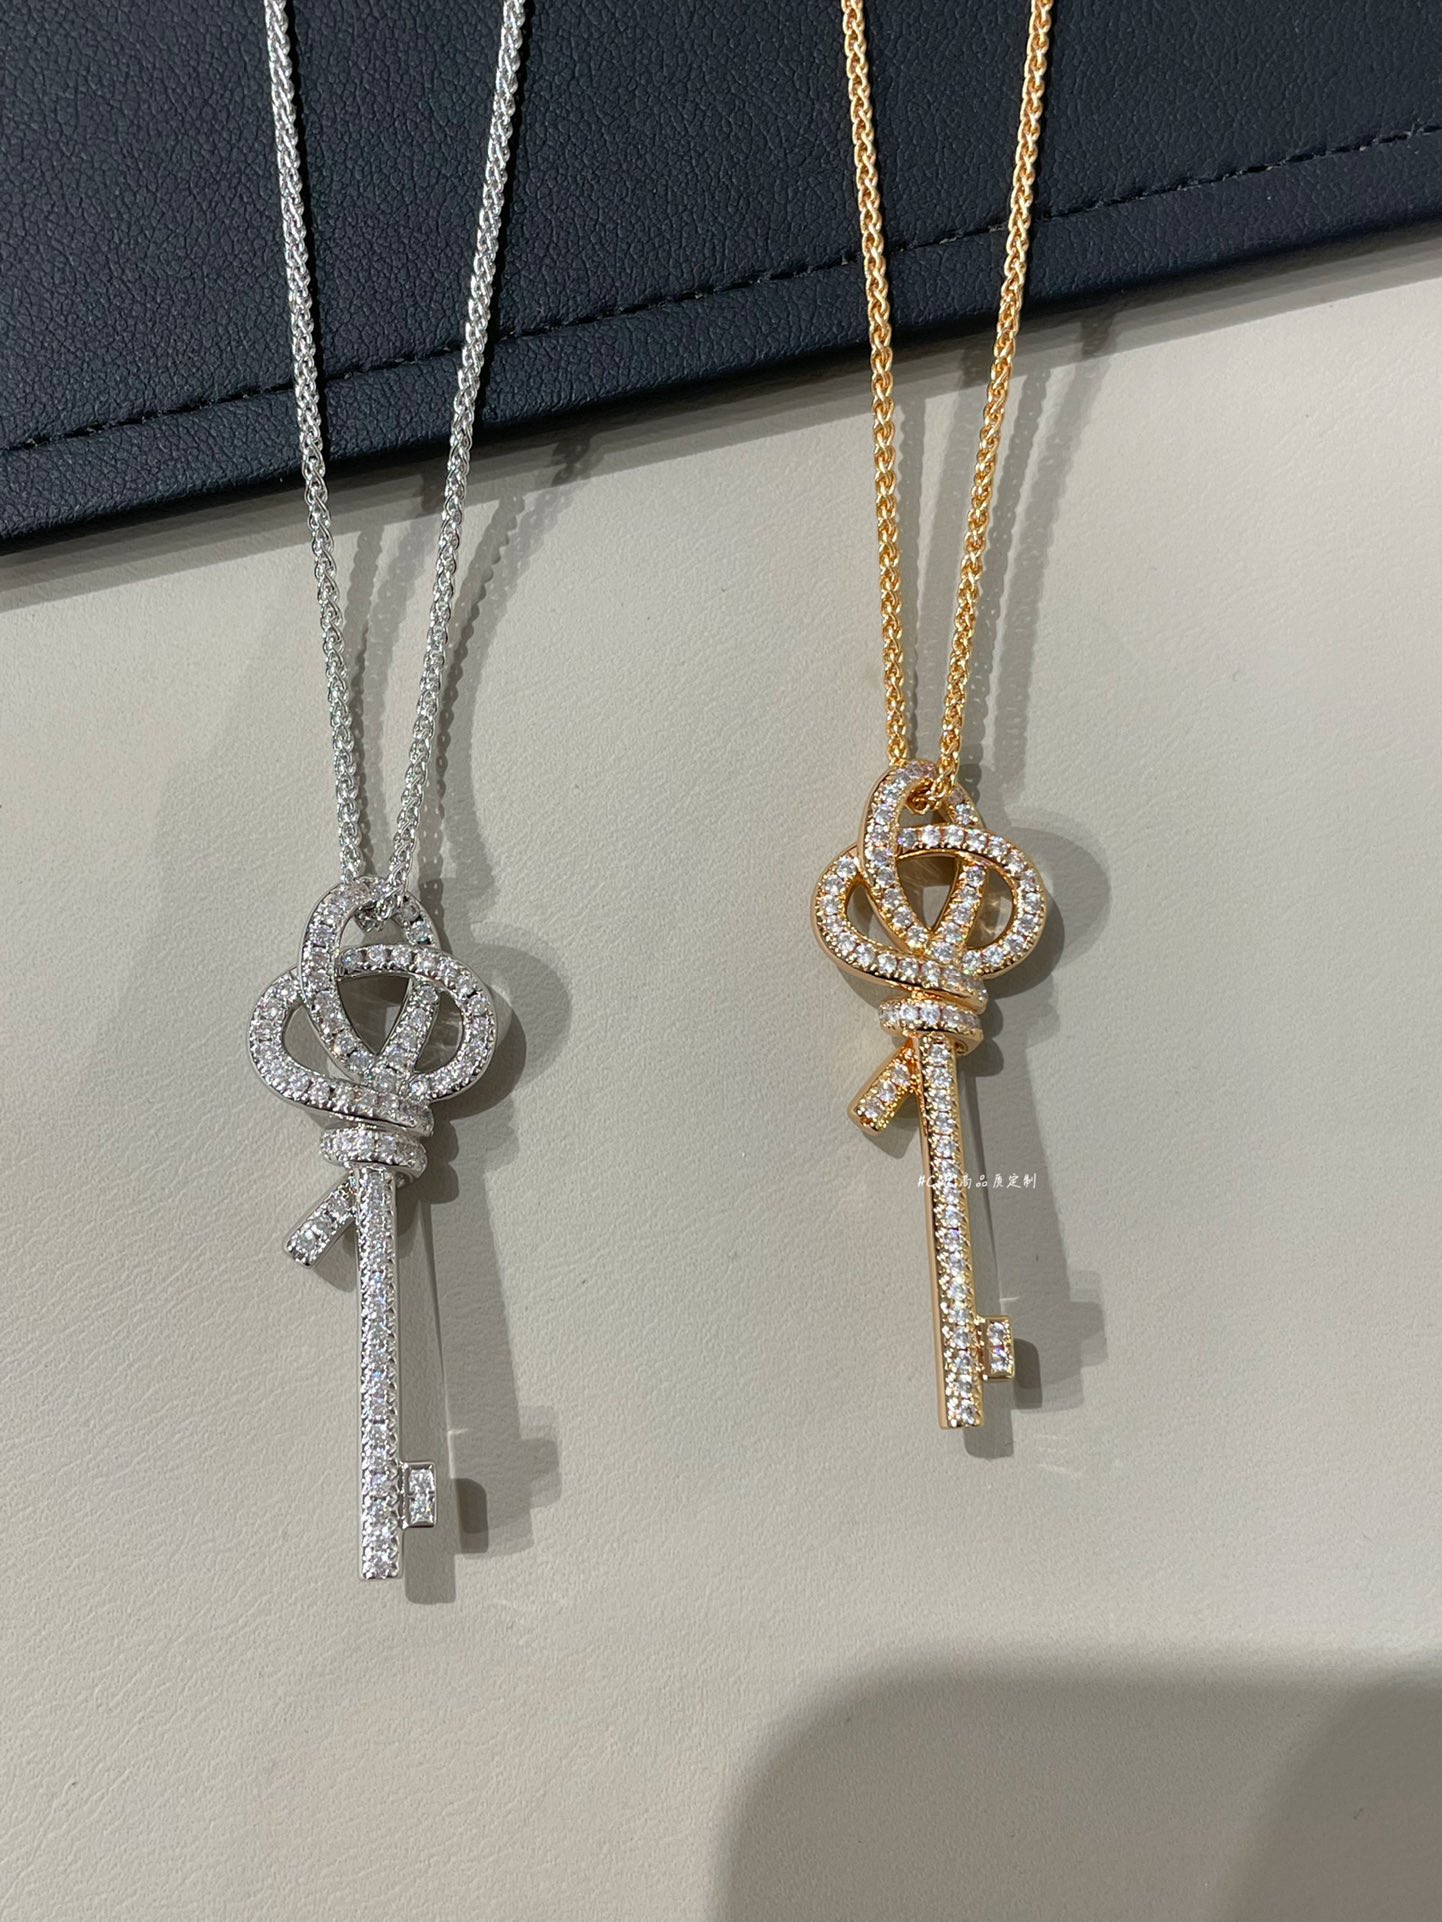 1:1
 Jewelry Necklaces & Pendants Platinum Rose Gold White Weave